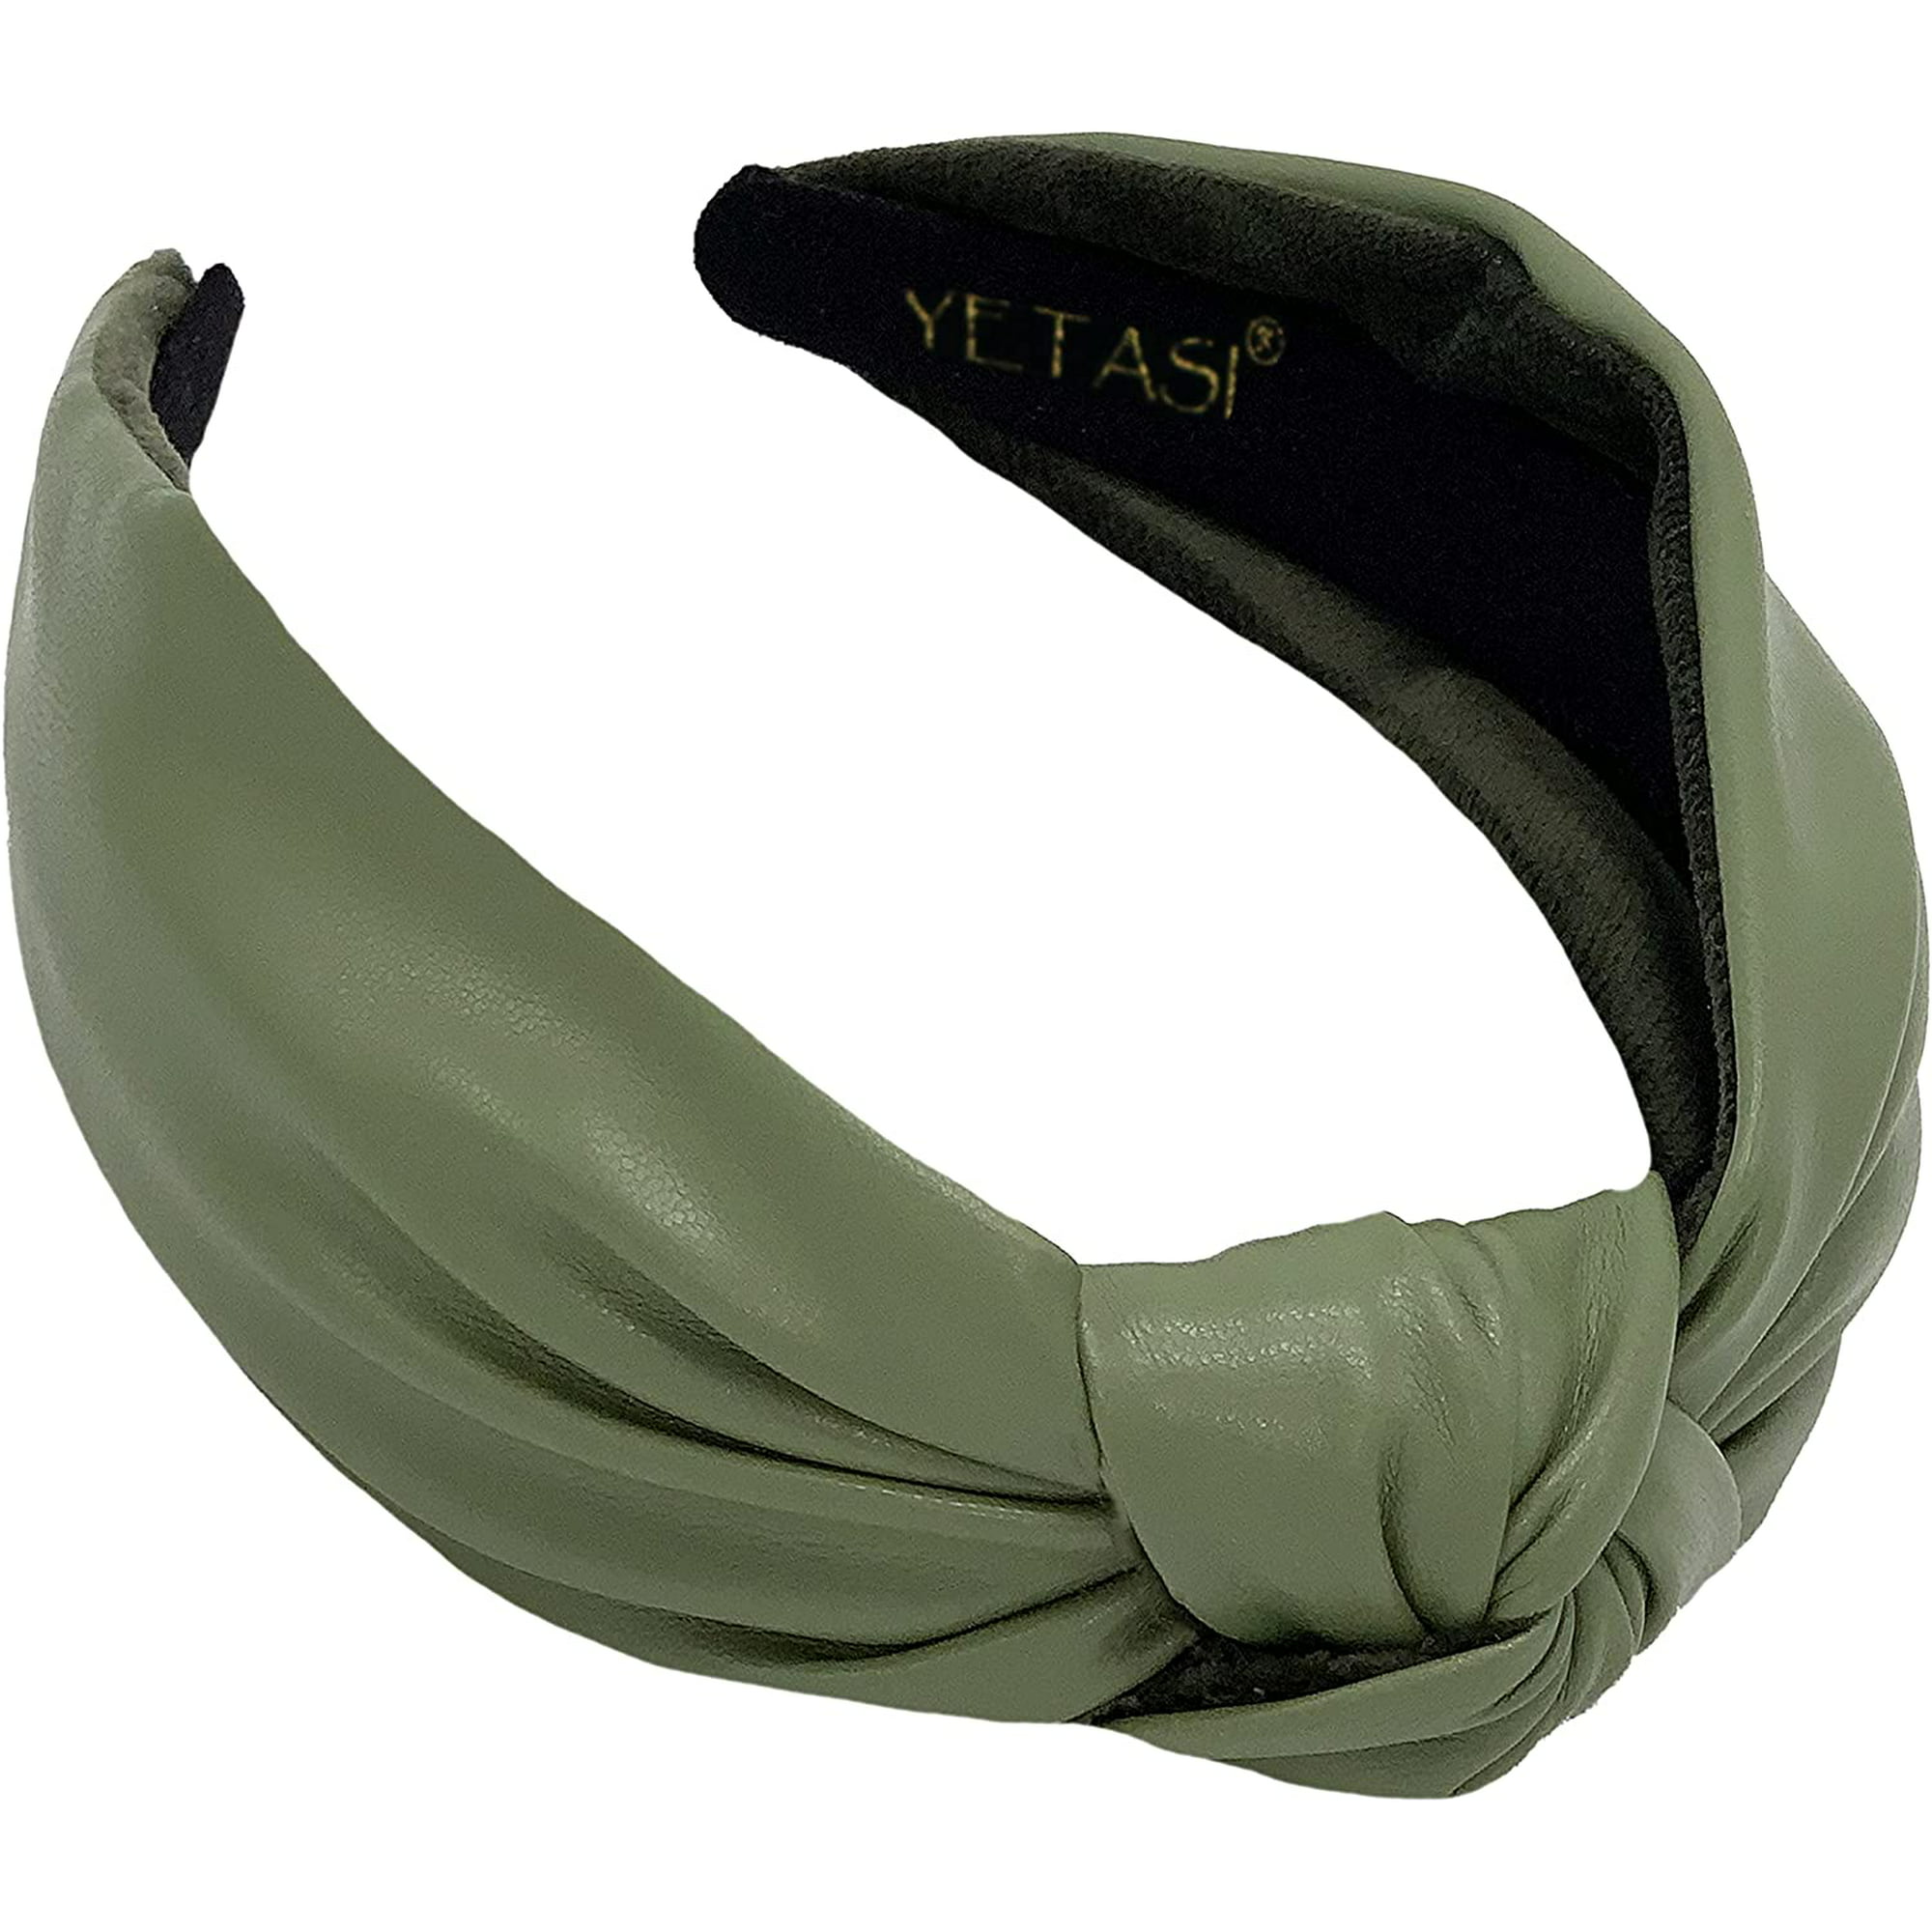 Leather Knotted Headband for Women goes with everything, Olive Green Knot  Headbands for women are Classy. Faux Leather headband Women Made with Soft  Material. Comfortable Fashion Headbands for Women | Walmart Canada